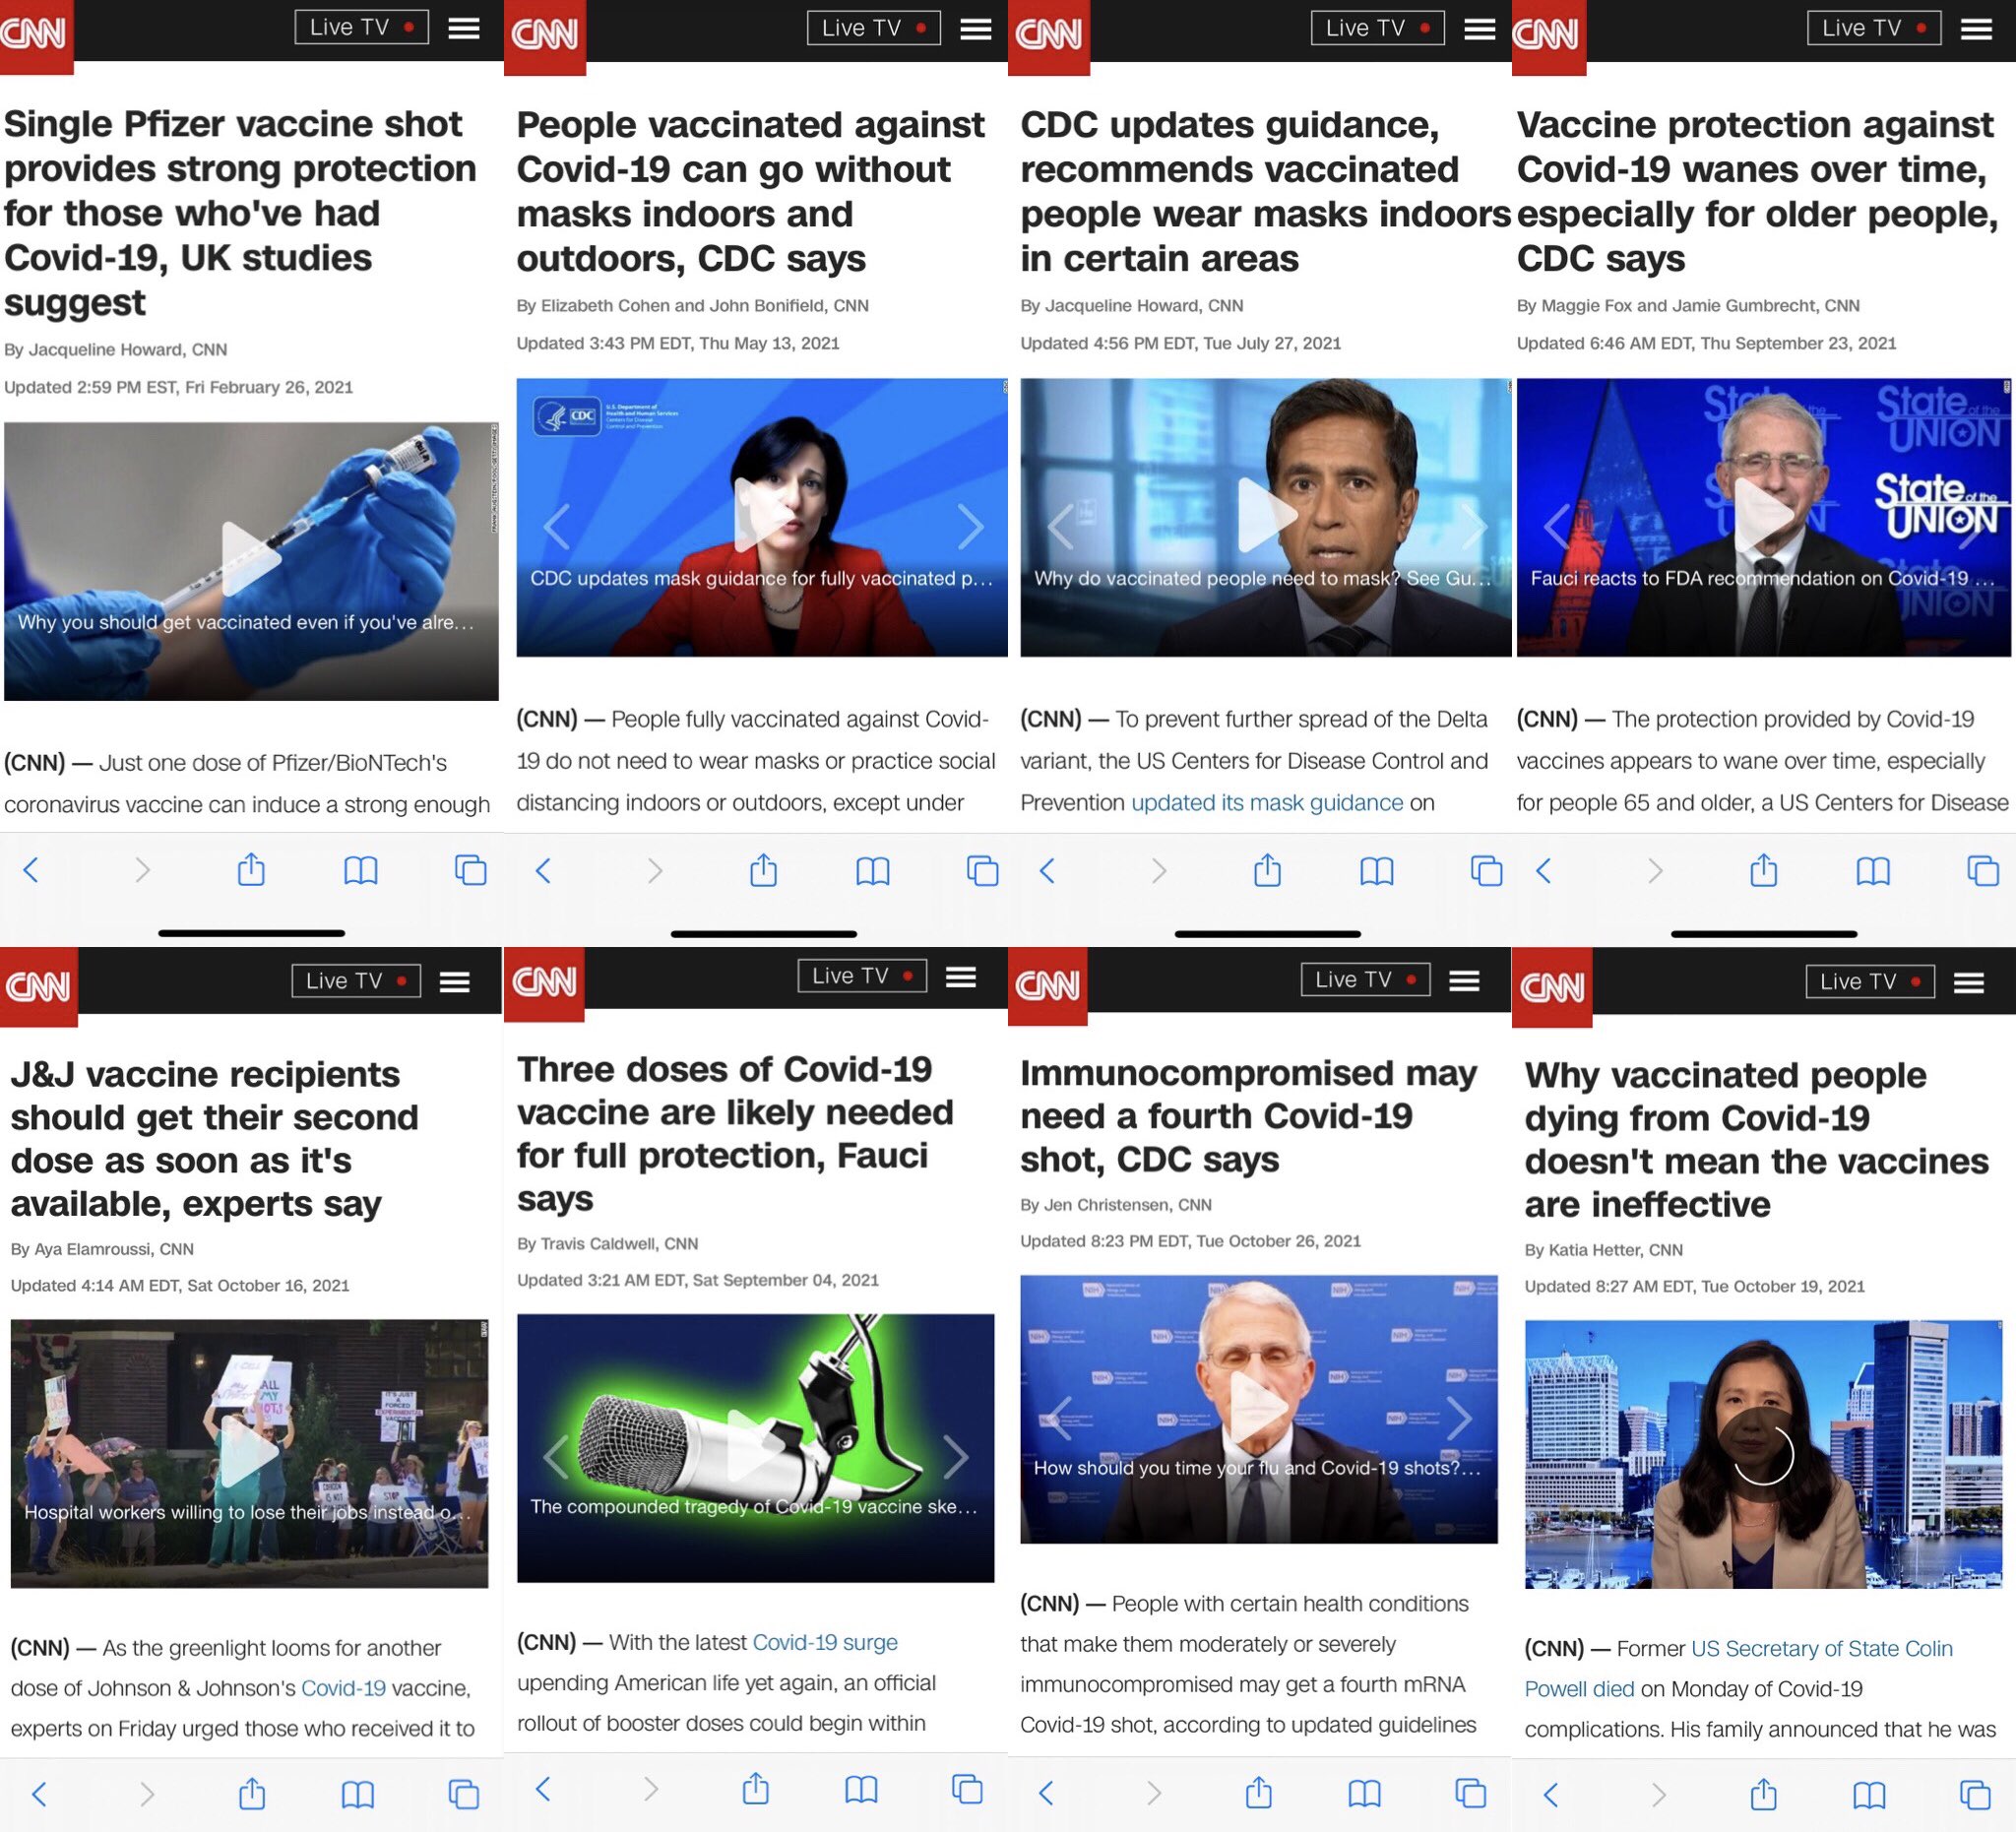 CNN Headlines showing how they move the goalpost on “vaccines”